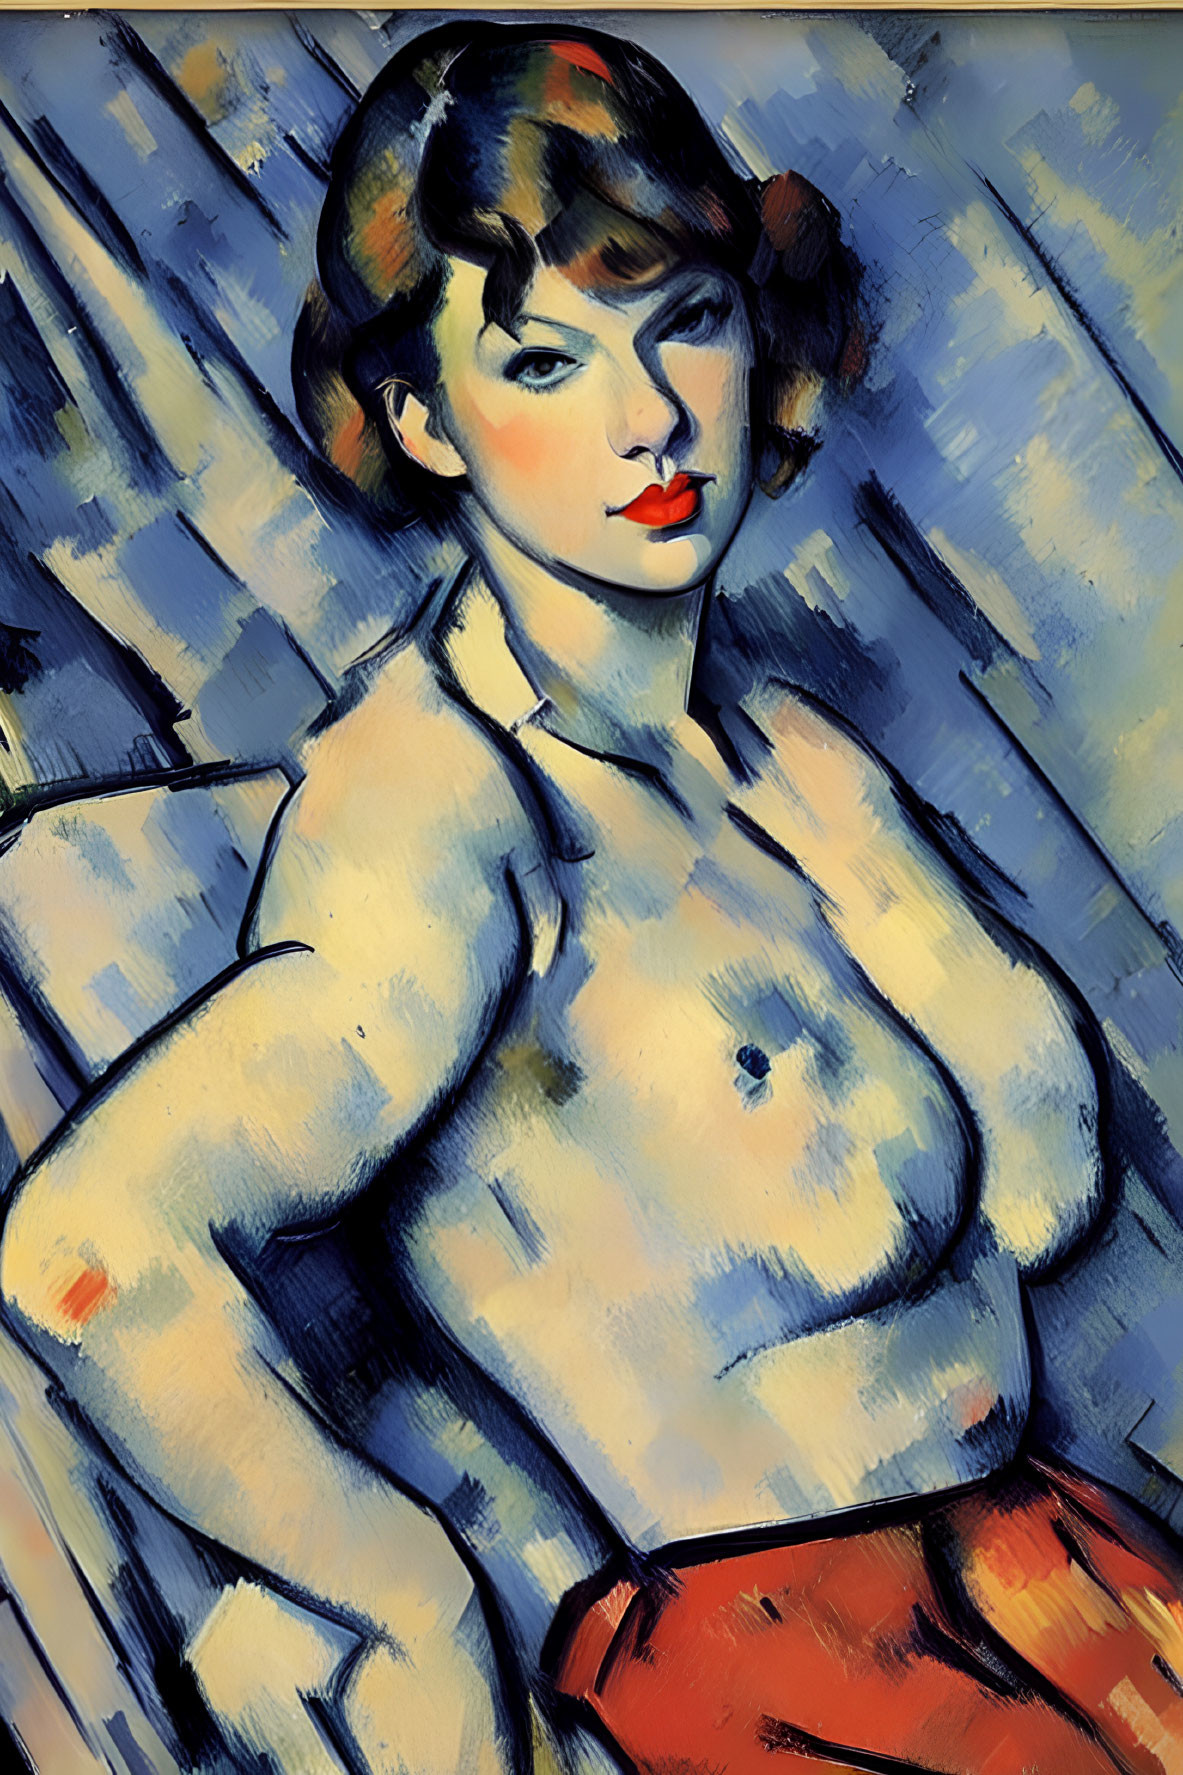 Woman with Bob Haircut in Cubist Style with Blue and Yellow Tones